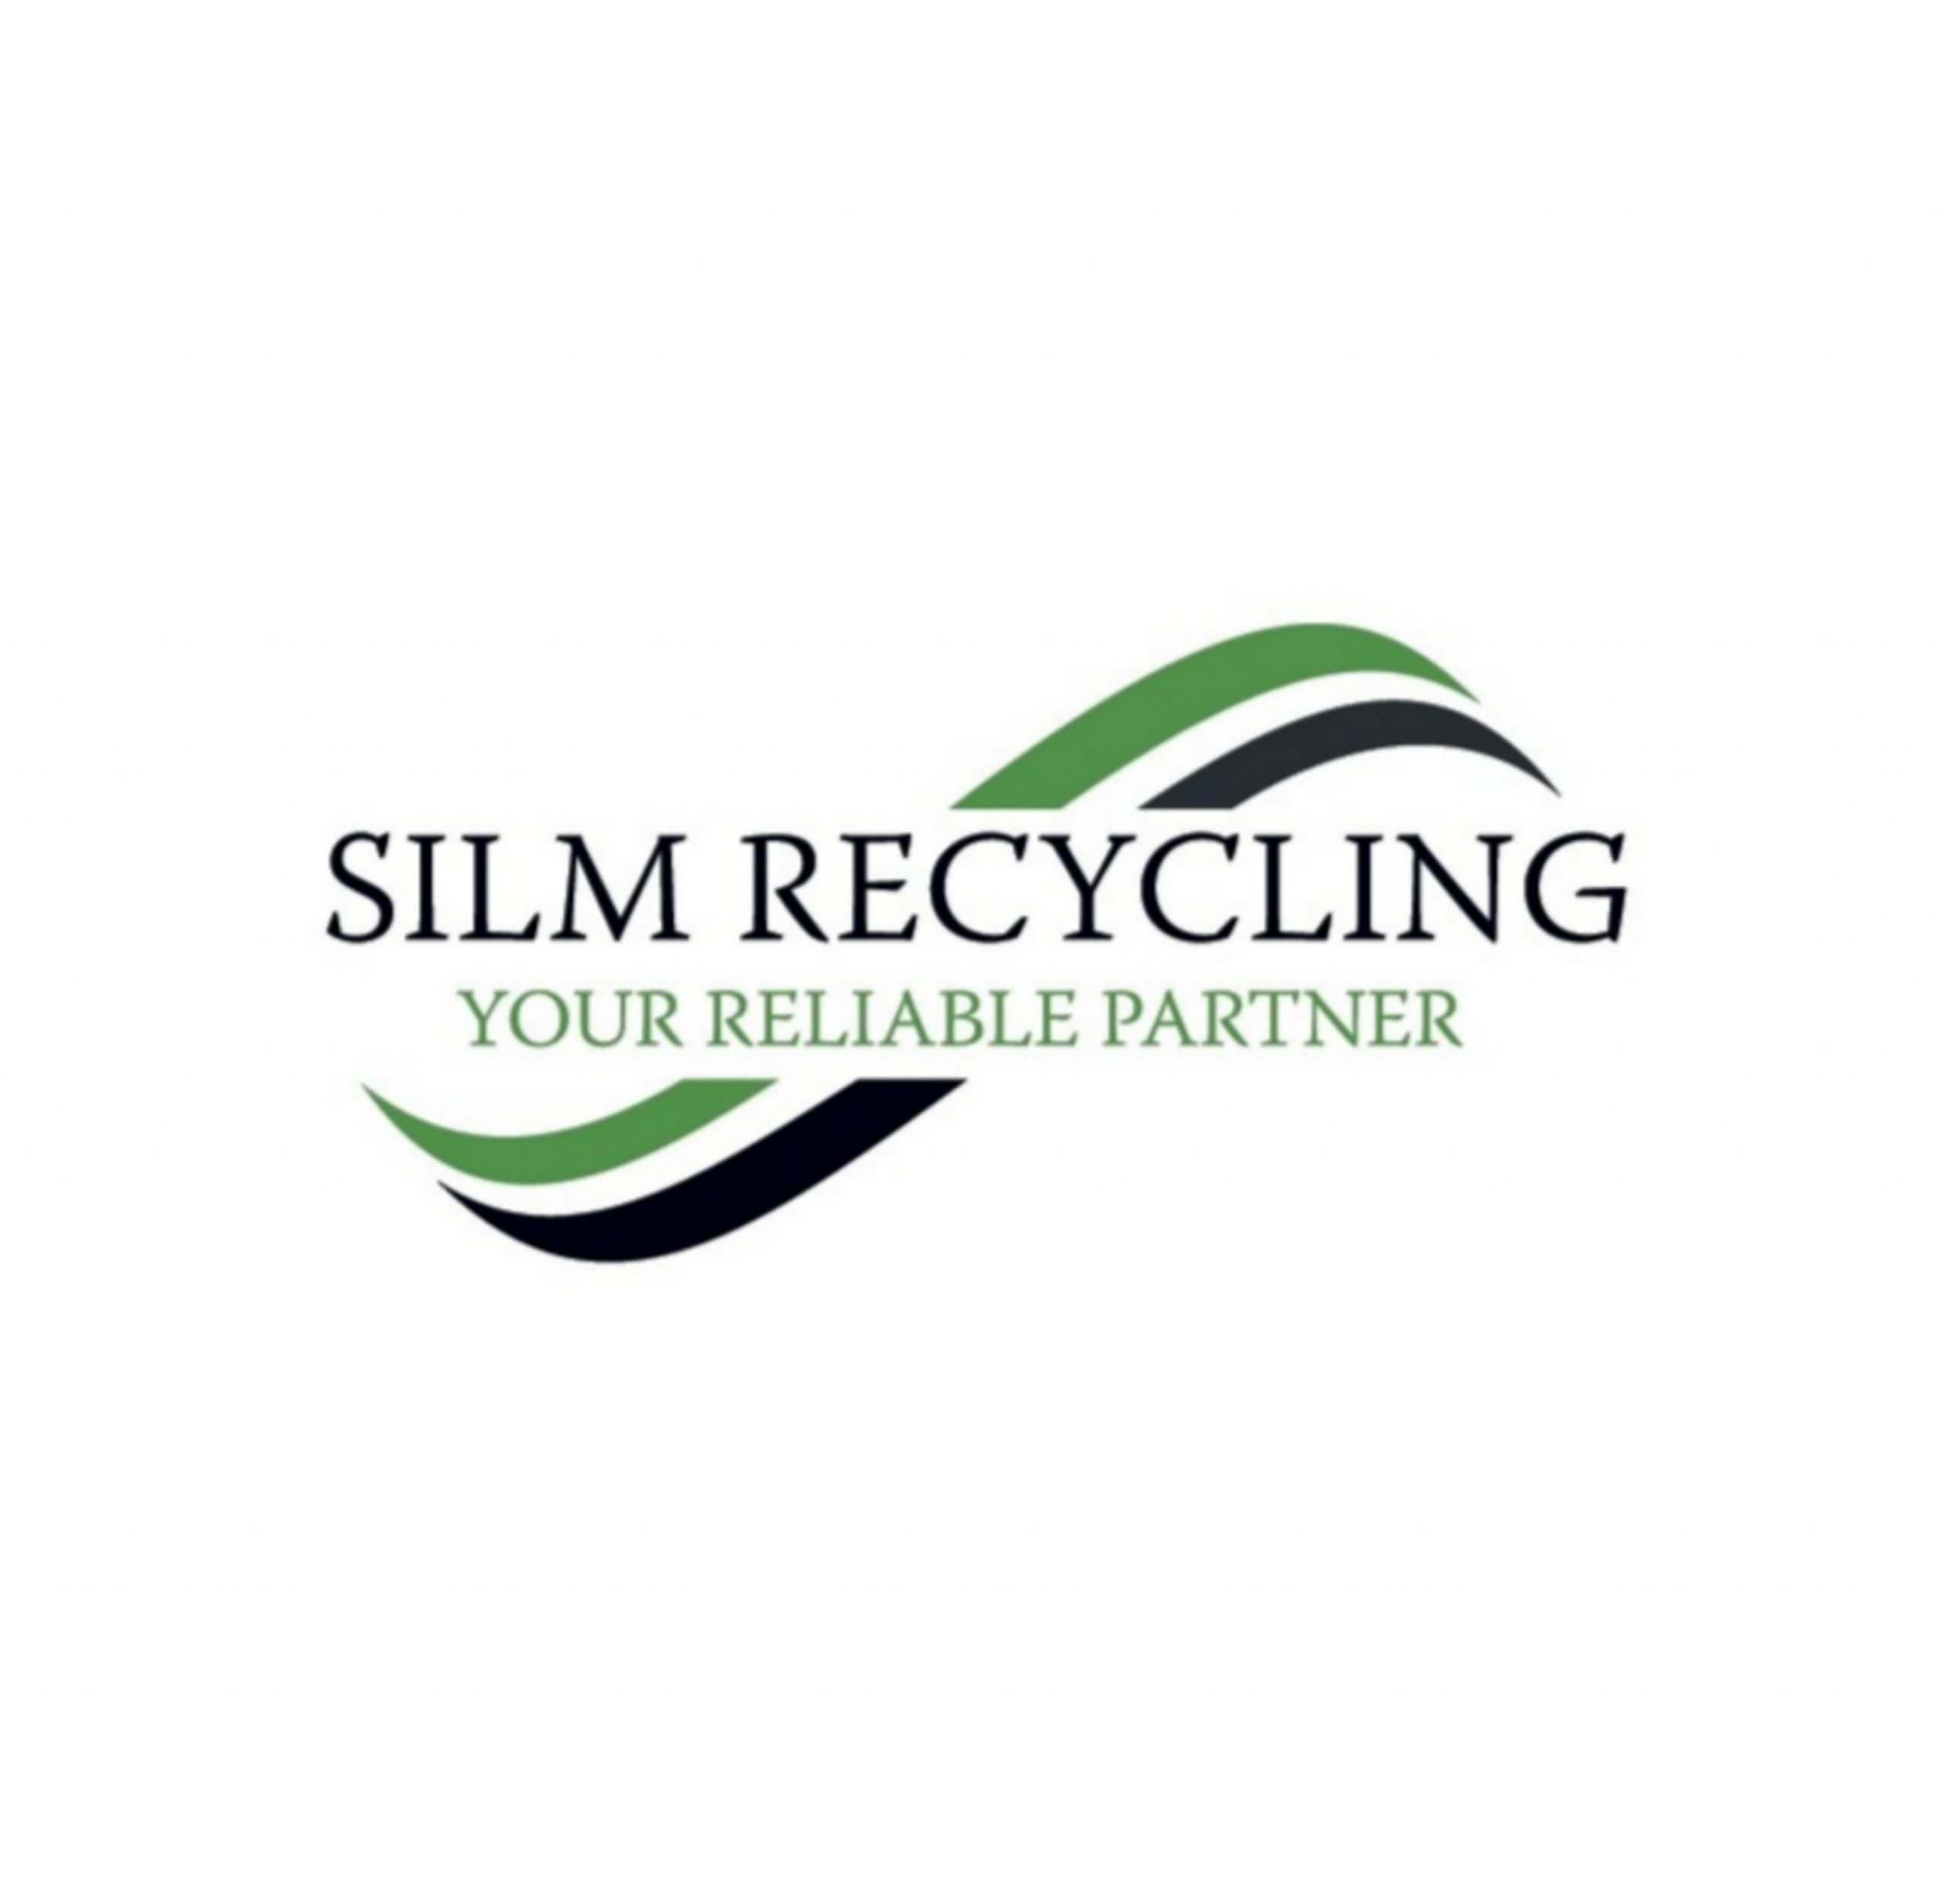 Silm Recycling